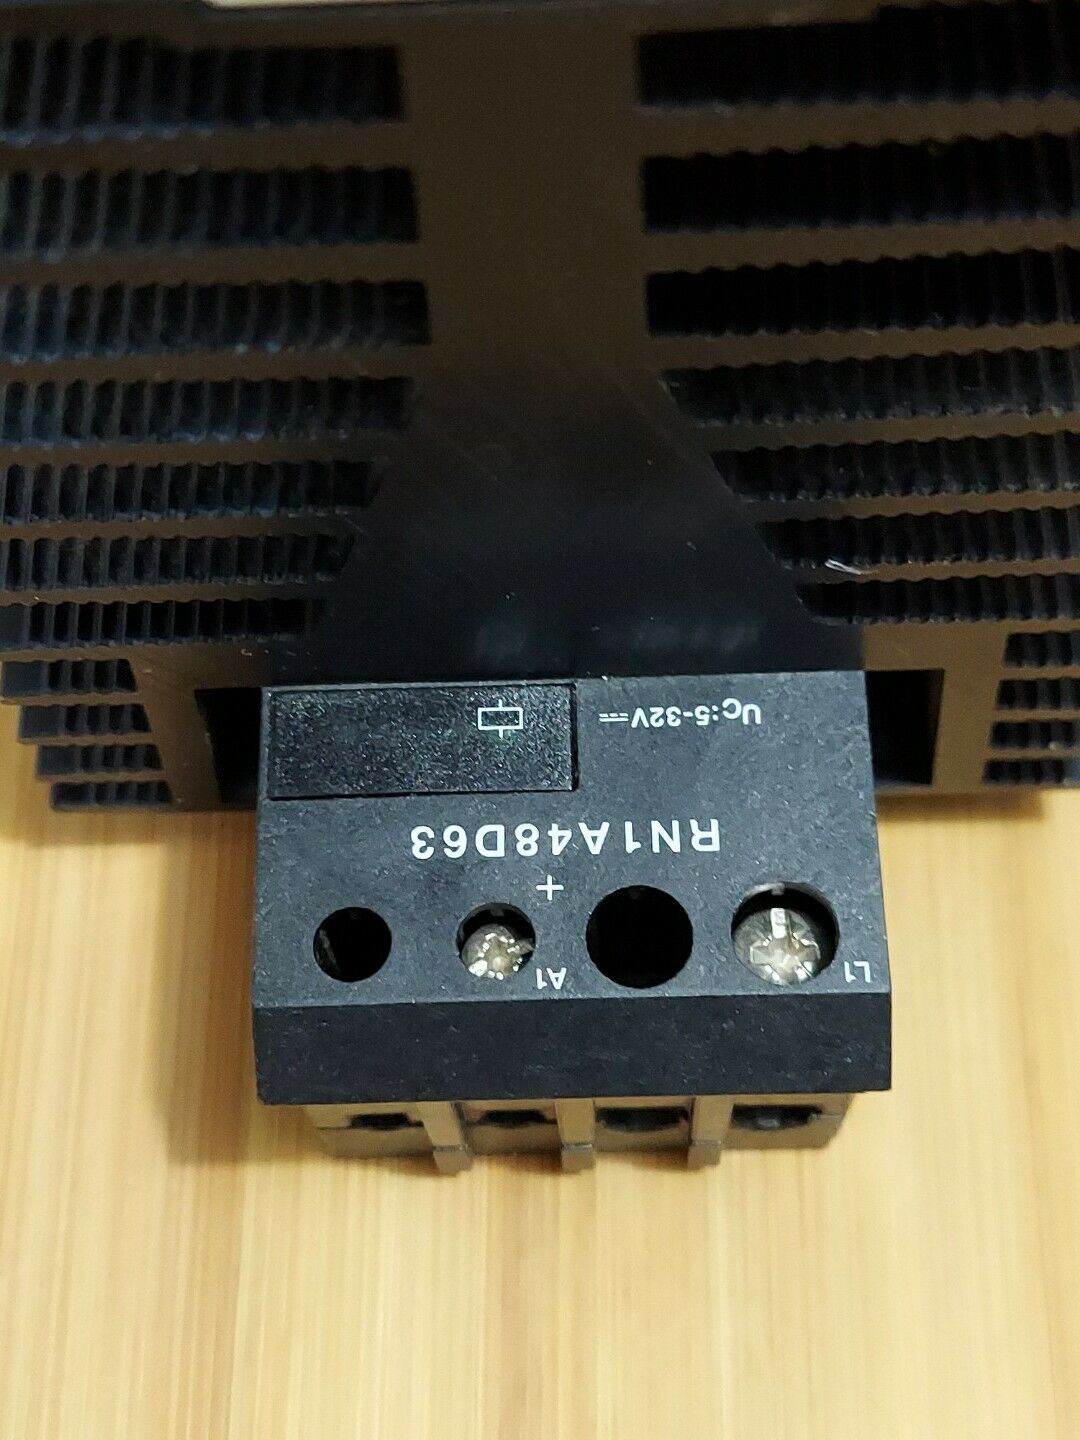 Carlo Gavazzi RN1A48D63 Solid State Relay 5 to 32 VDC AC51:63A, 480VAC (GR127)